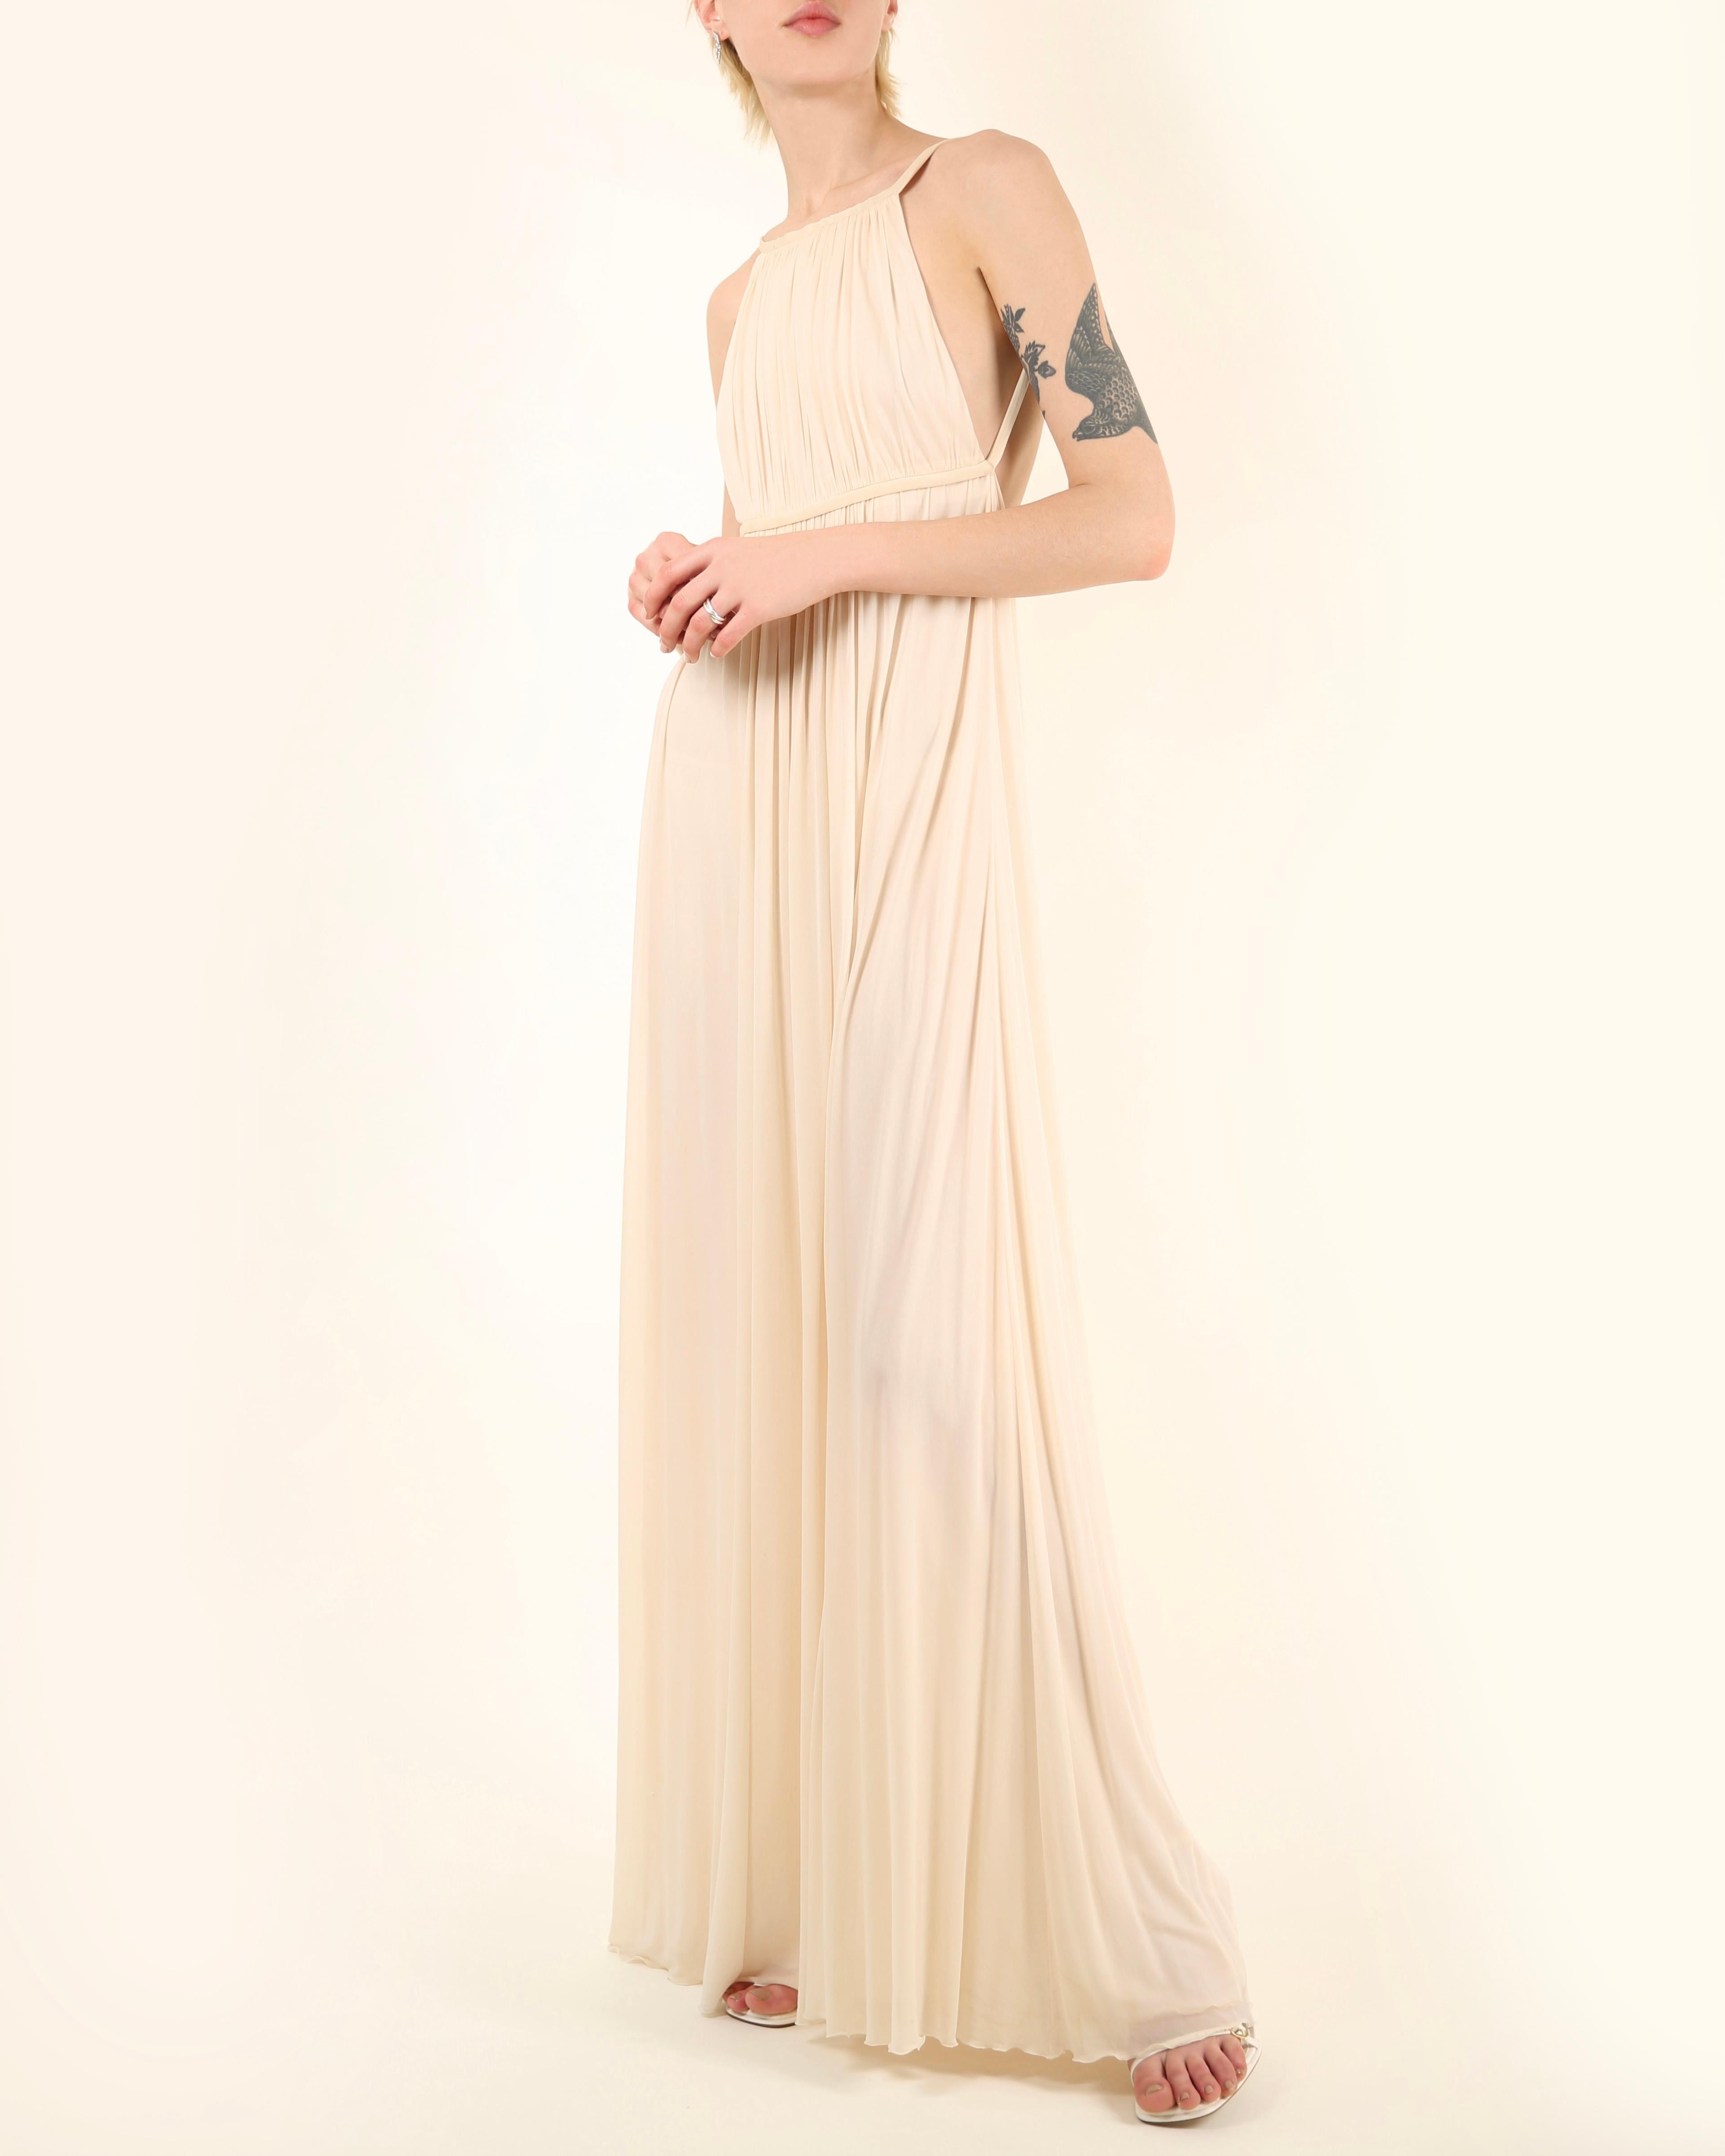 LOVE LALI VINTAGE 

Halston 2009
Floor length grecian style plisse gown in cream - the colour is very slightly lighter than in the pictures
Completely backless cut

Composition:
100% Cupro

Size :
Marked as a size 42 - I believe this would be a FR